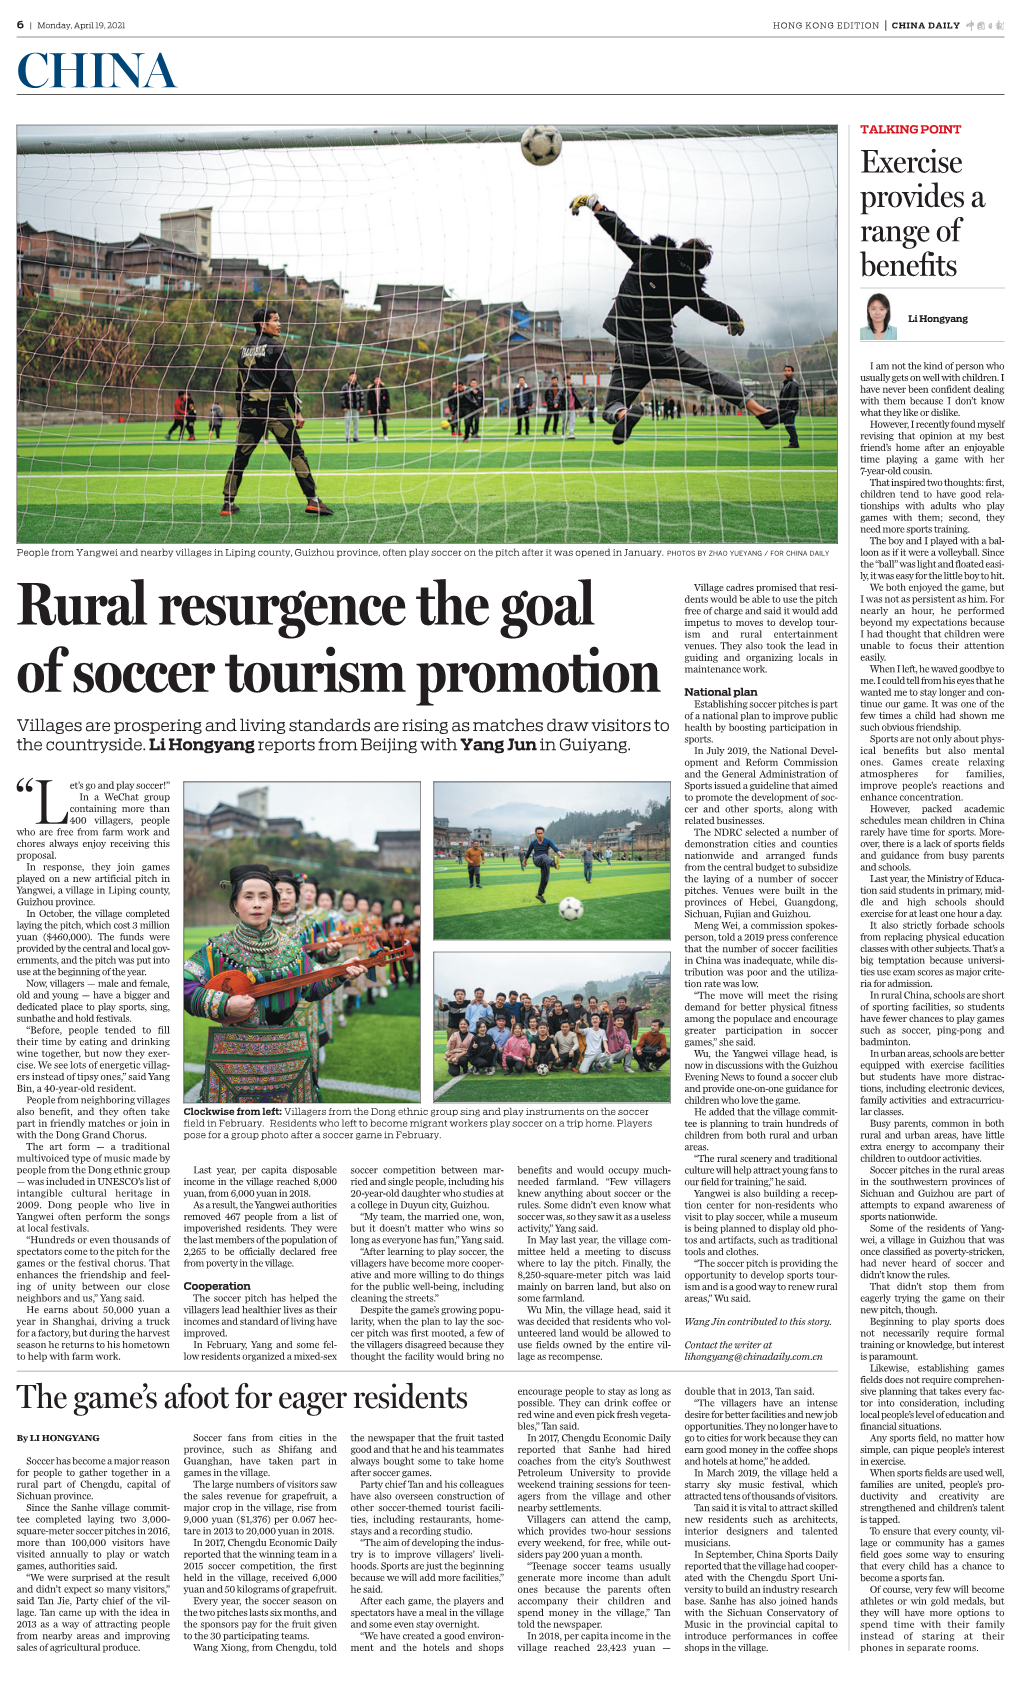 Rural Resurgence the Goal of Soccer Tourism Promotion